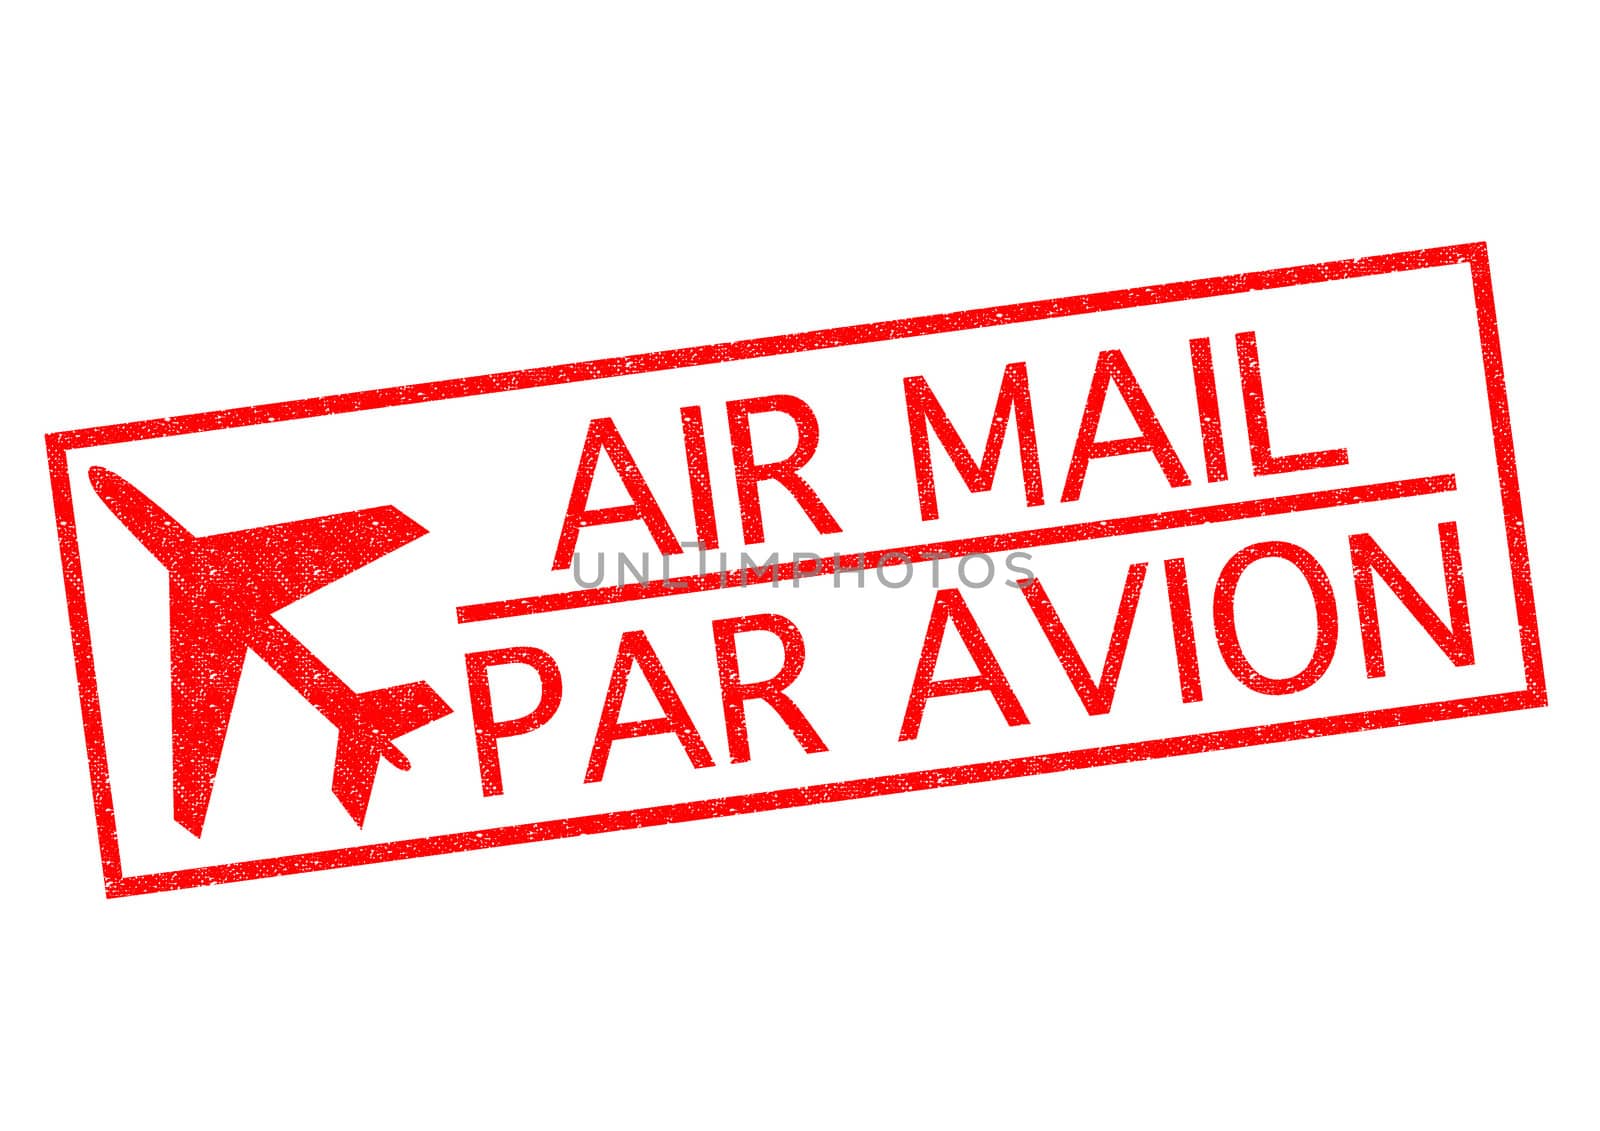 AIR MAIL - PAR AVION red Rubber Stamp over a white background.